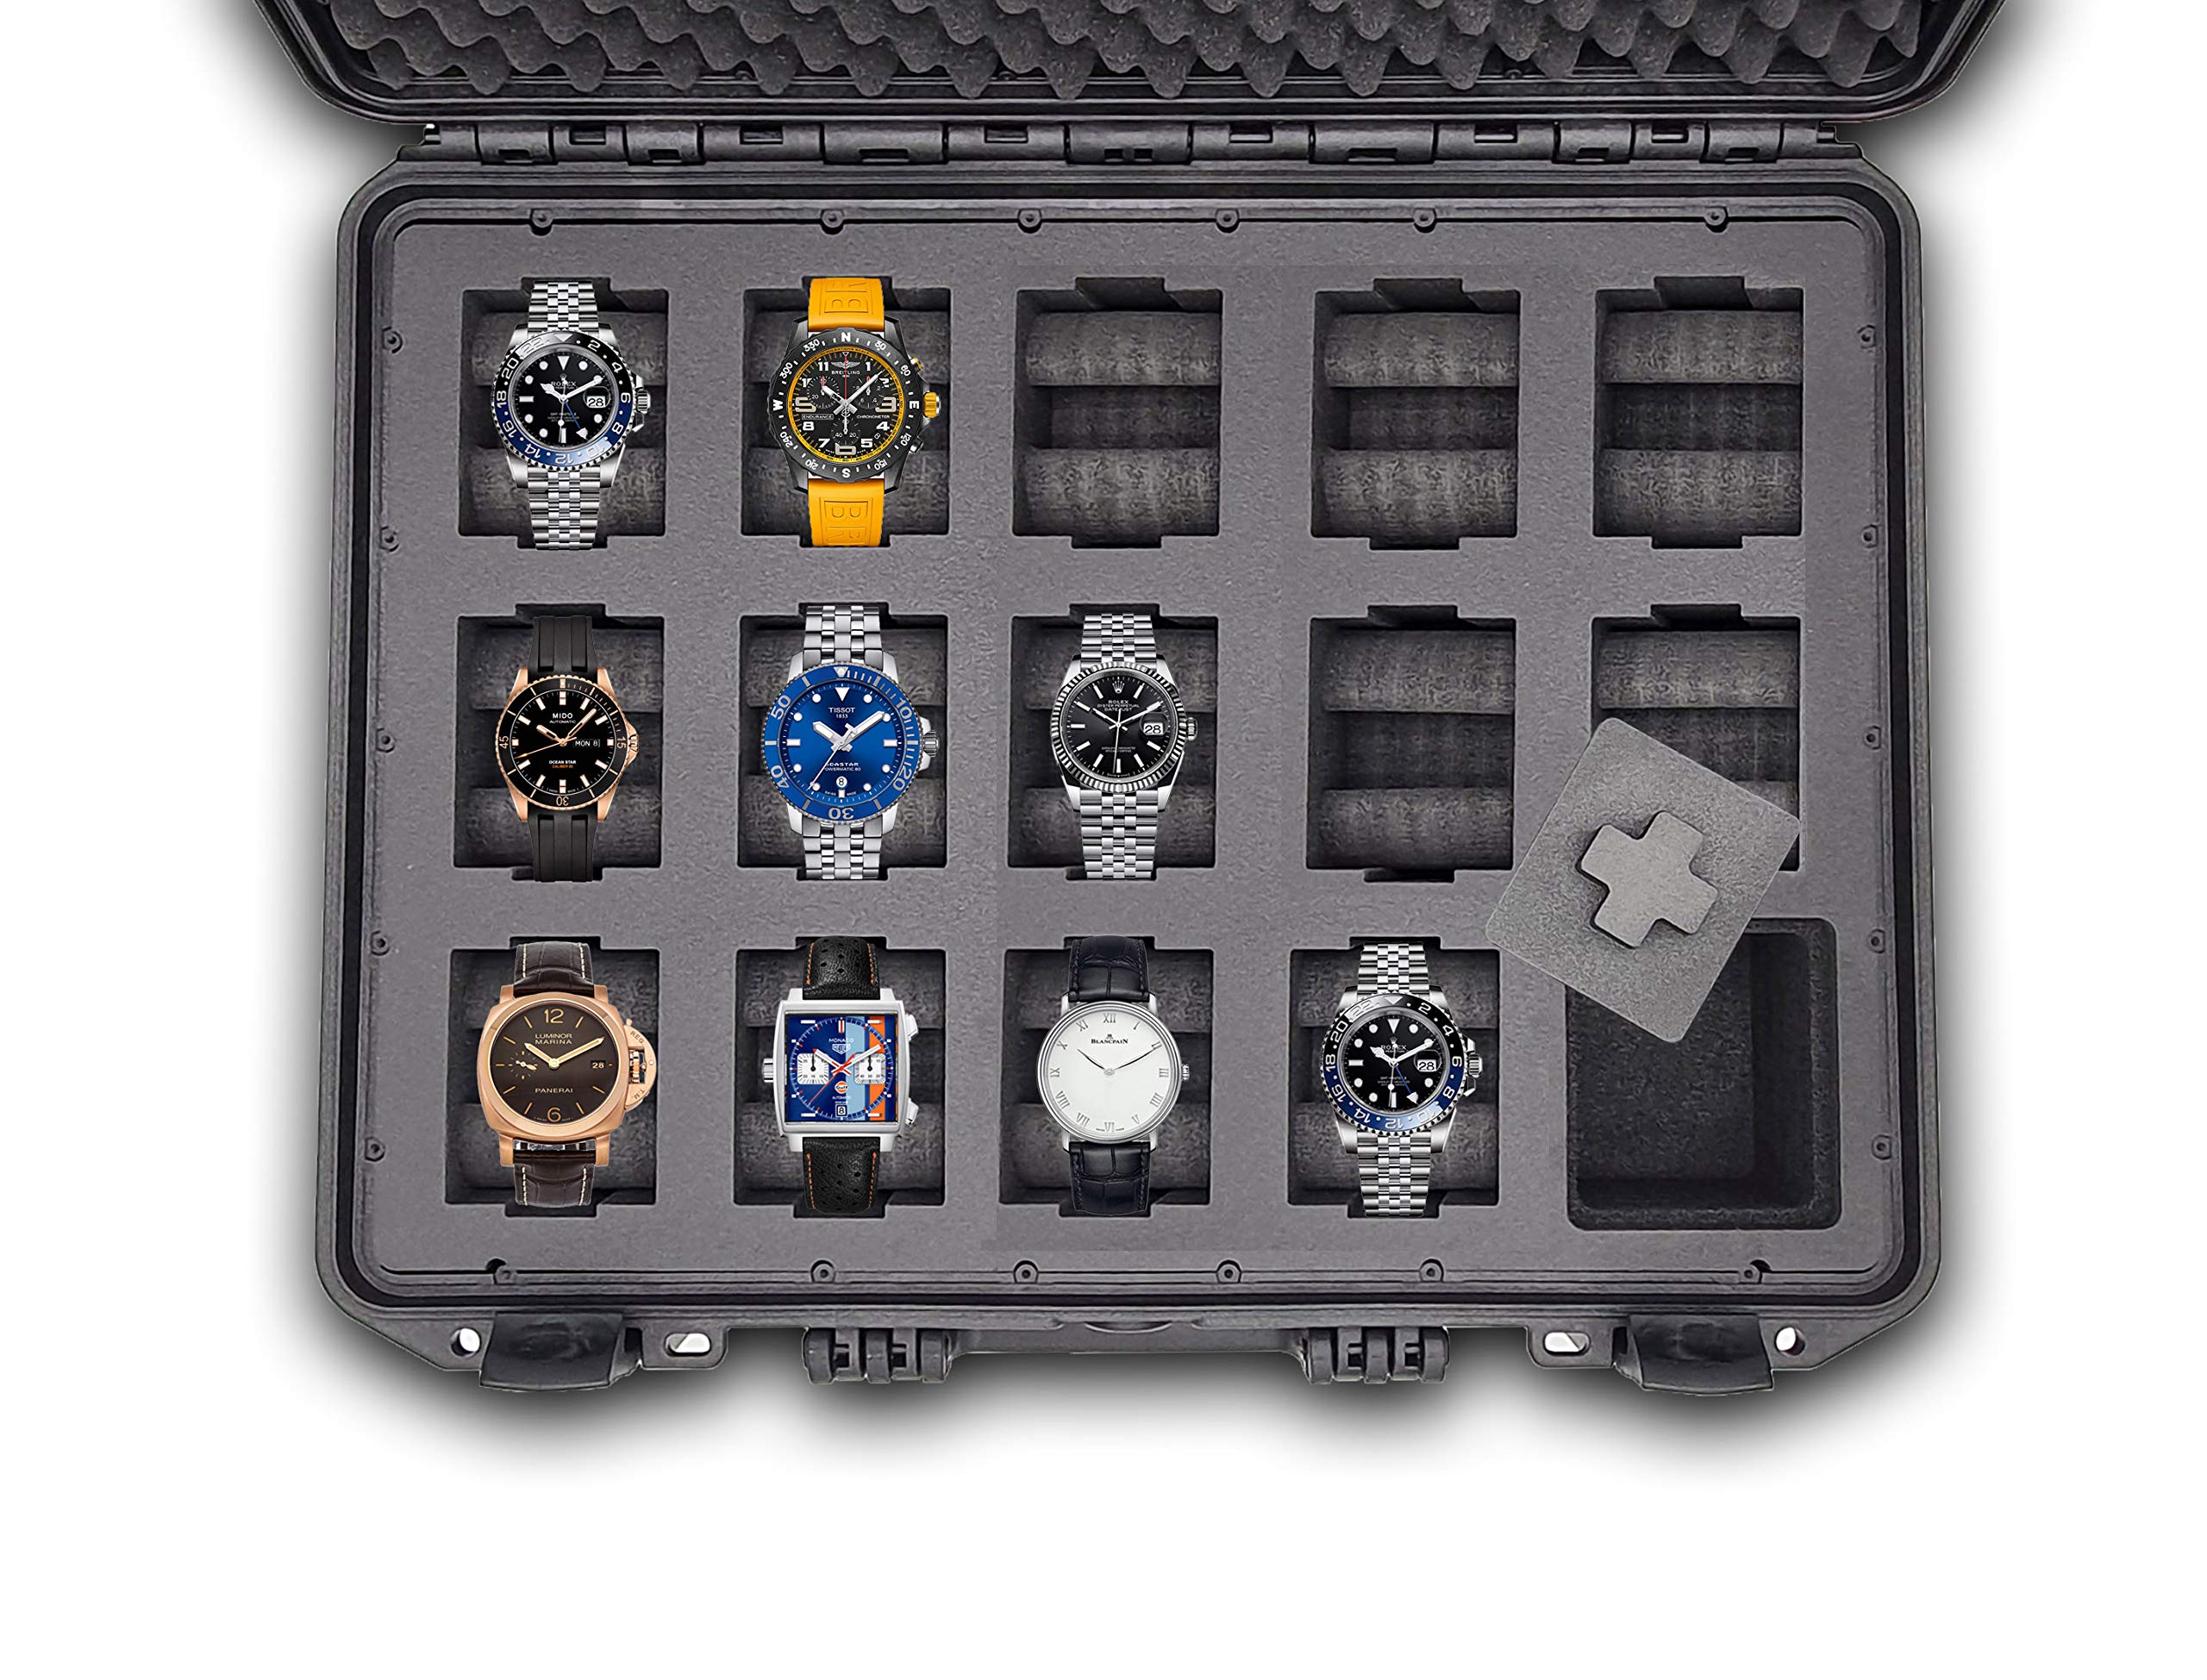 mc-cases® Watch Travel Case for up to 14 Watches - Waterproof - Dustproof - lockable - Made in Germany